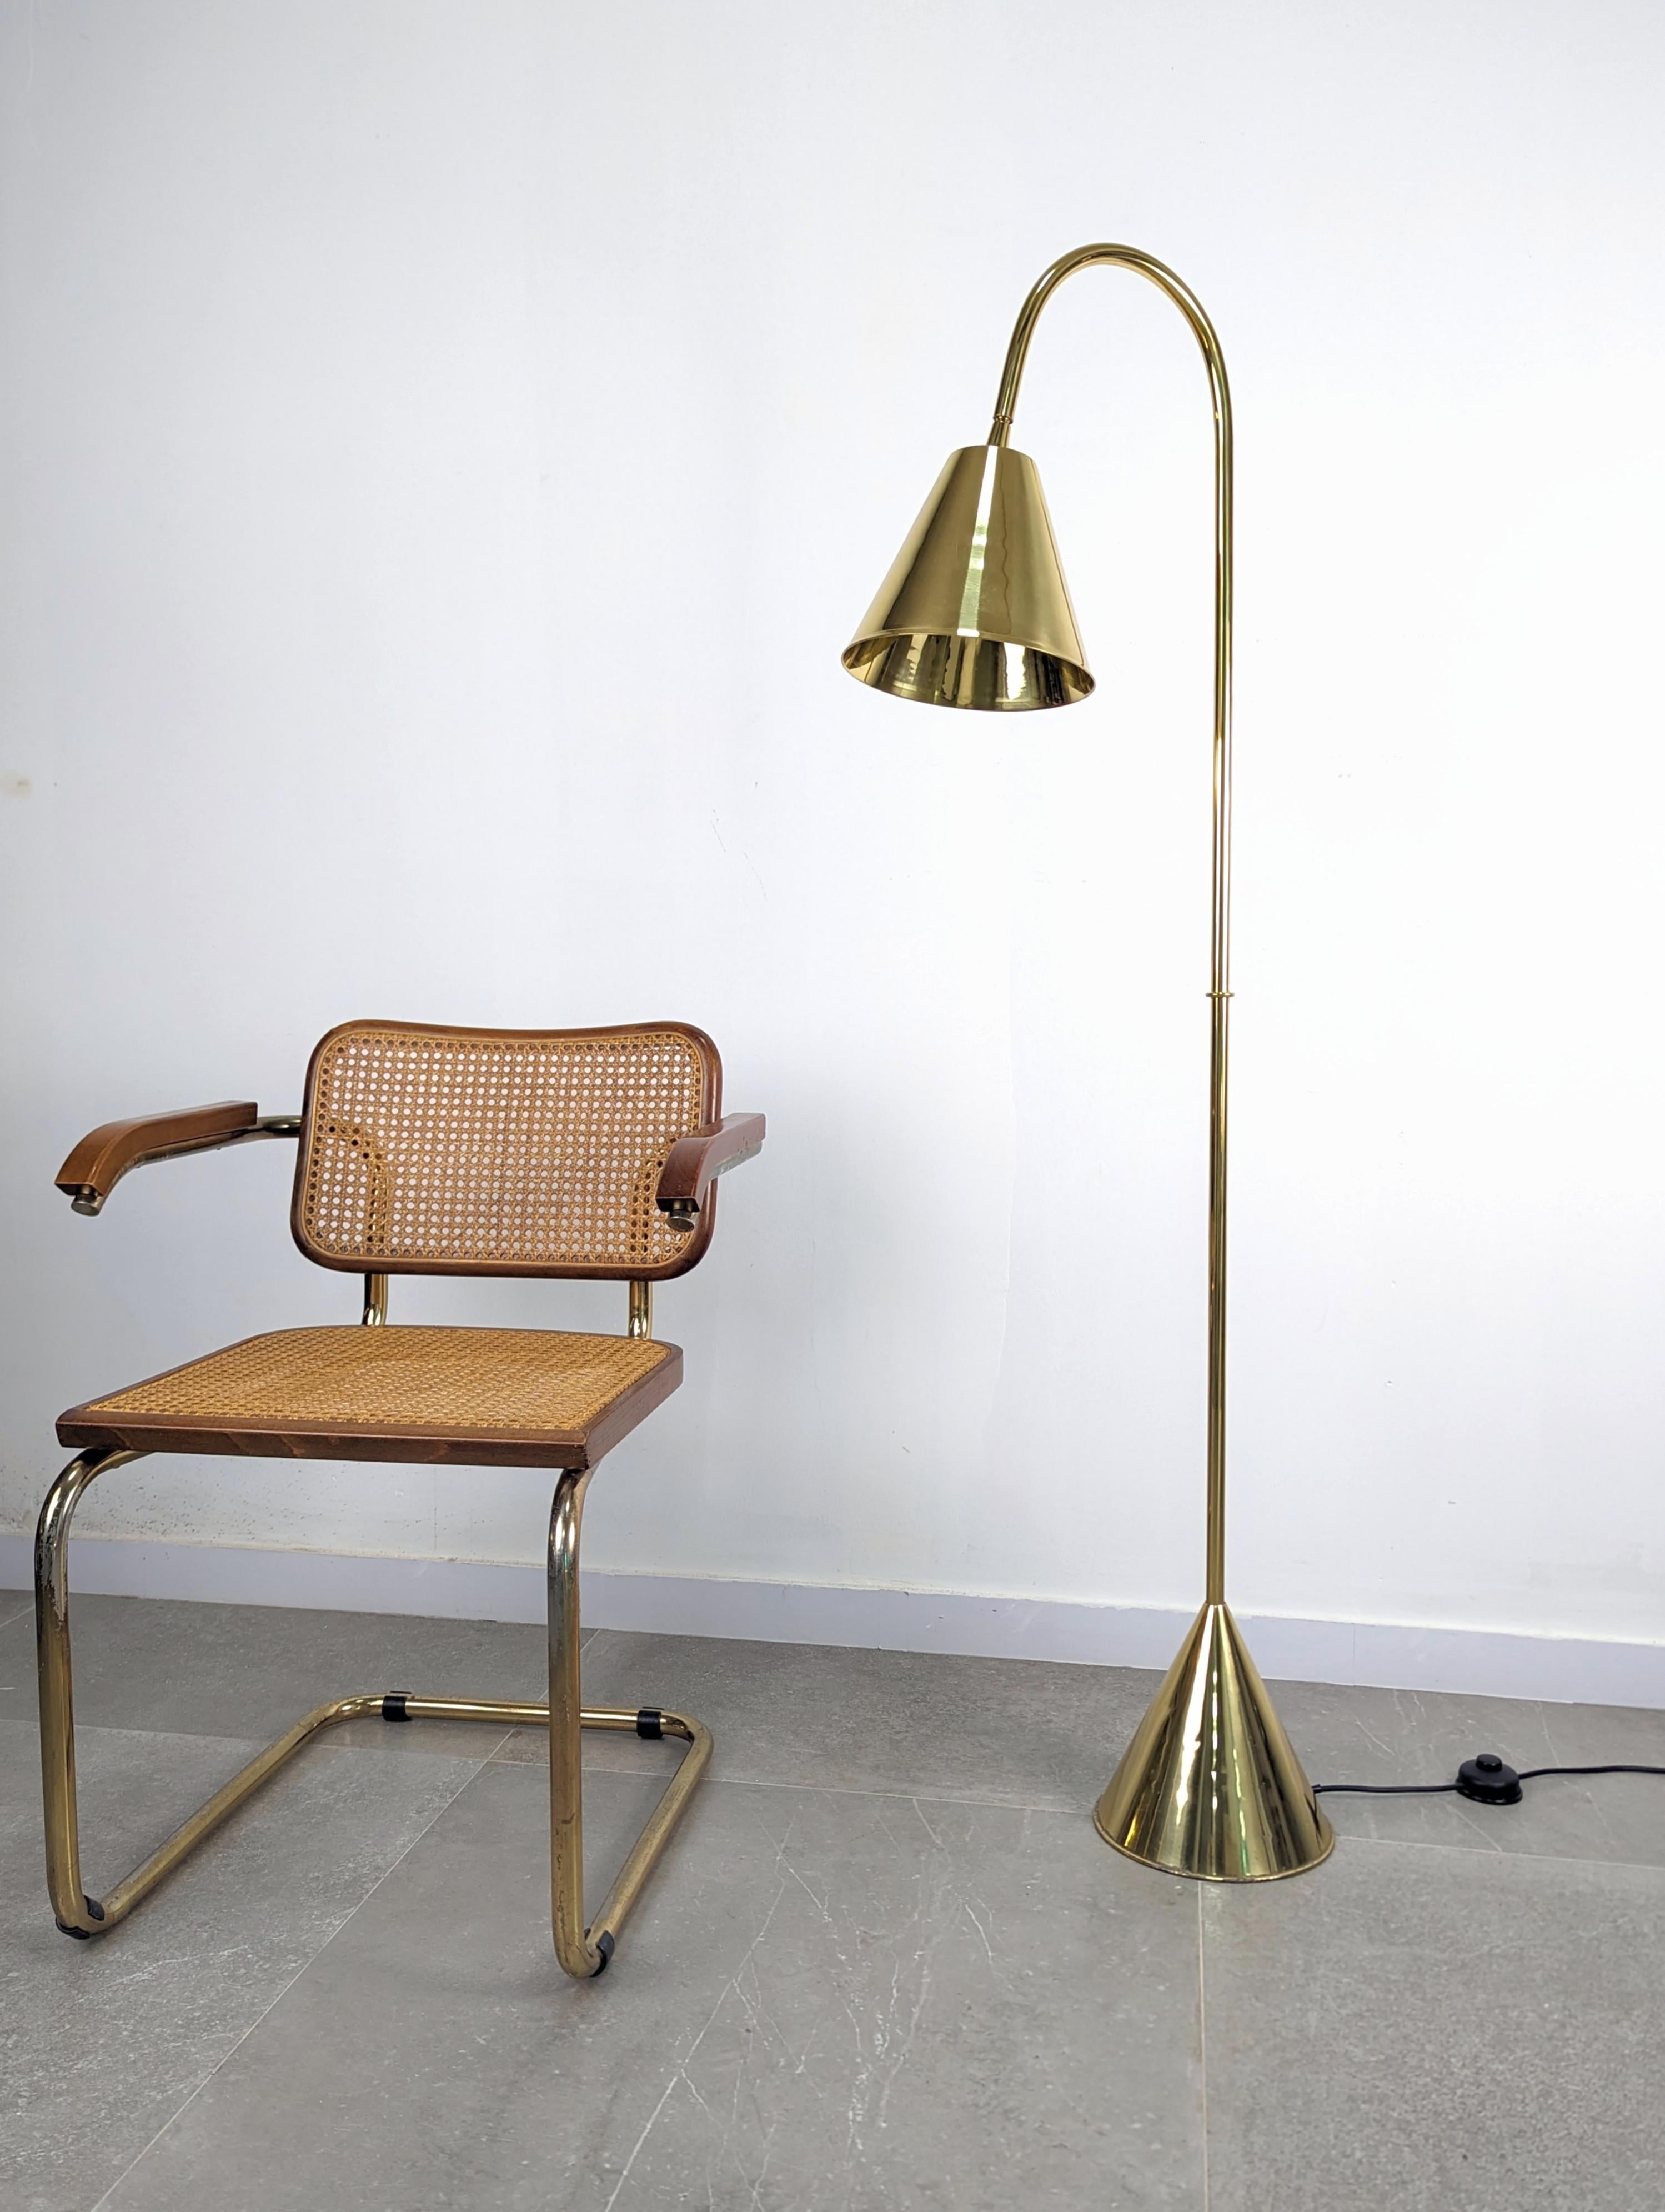 European Jacques Adnet floor lamp by Valentí in brass